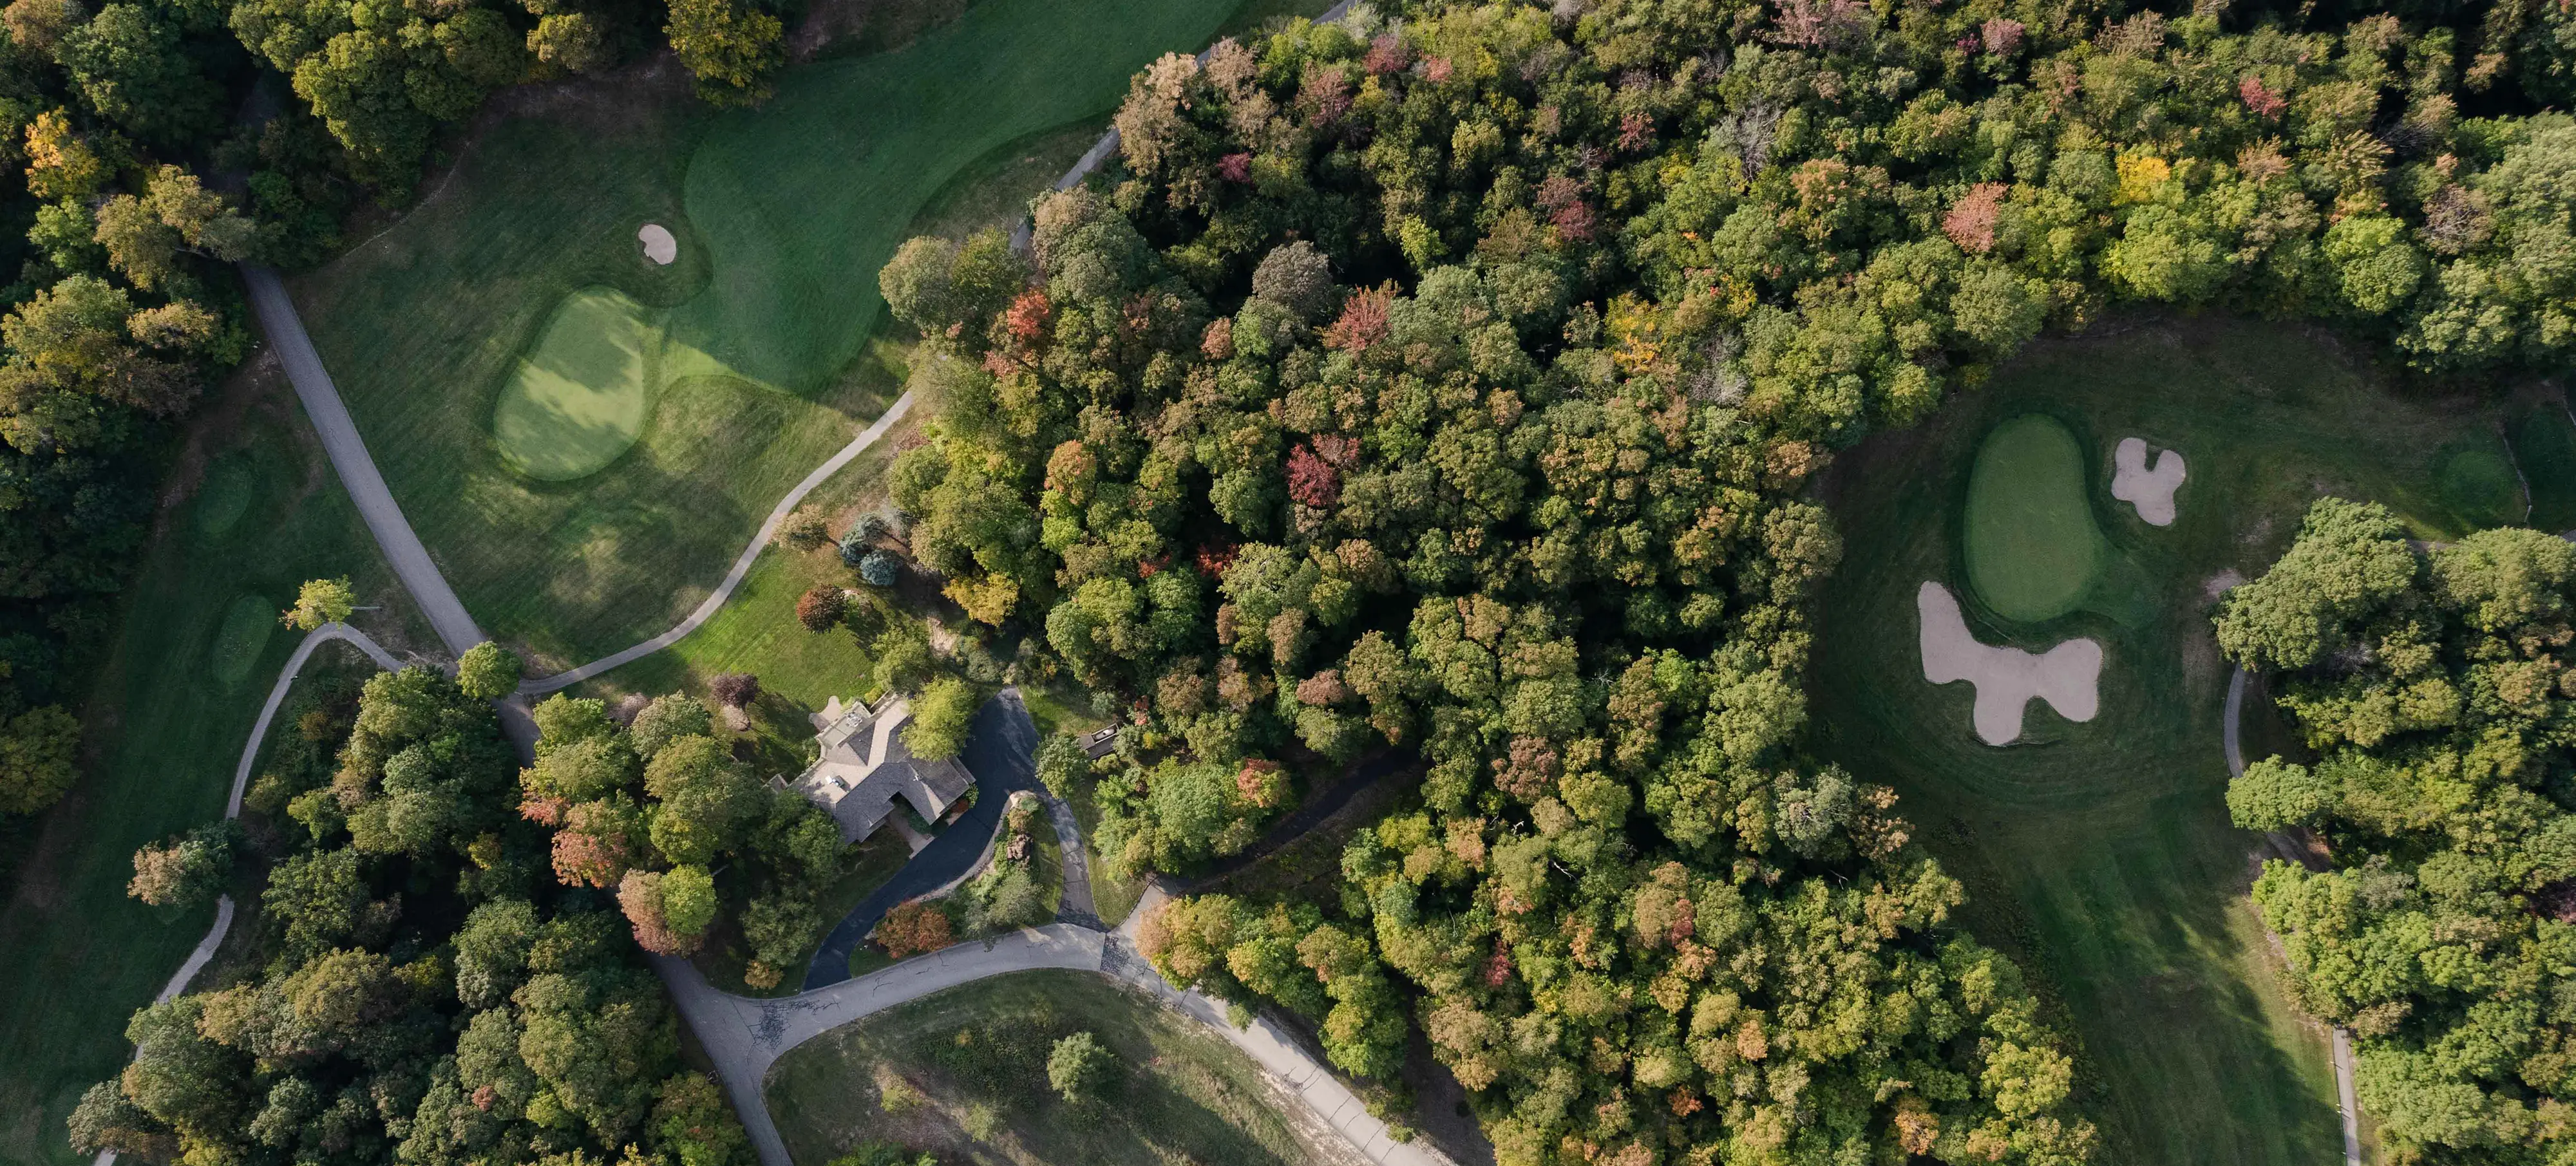 Drone Photography shot of golf course